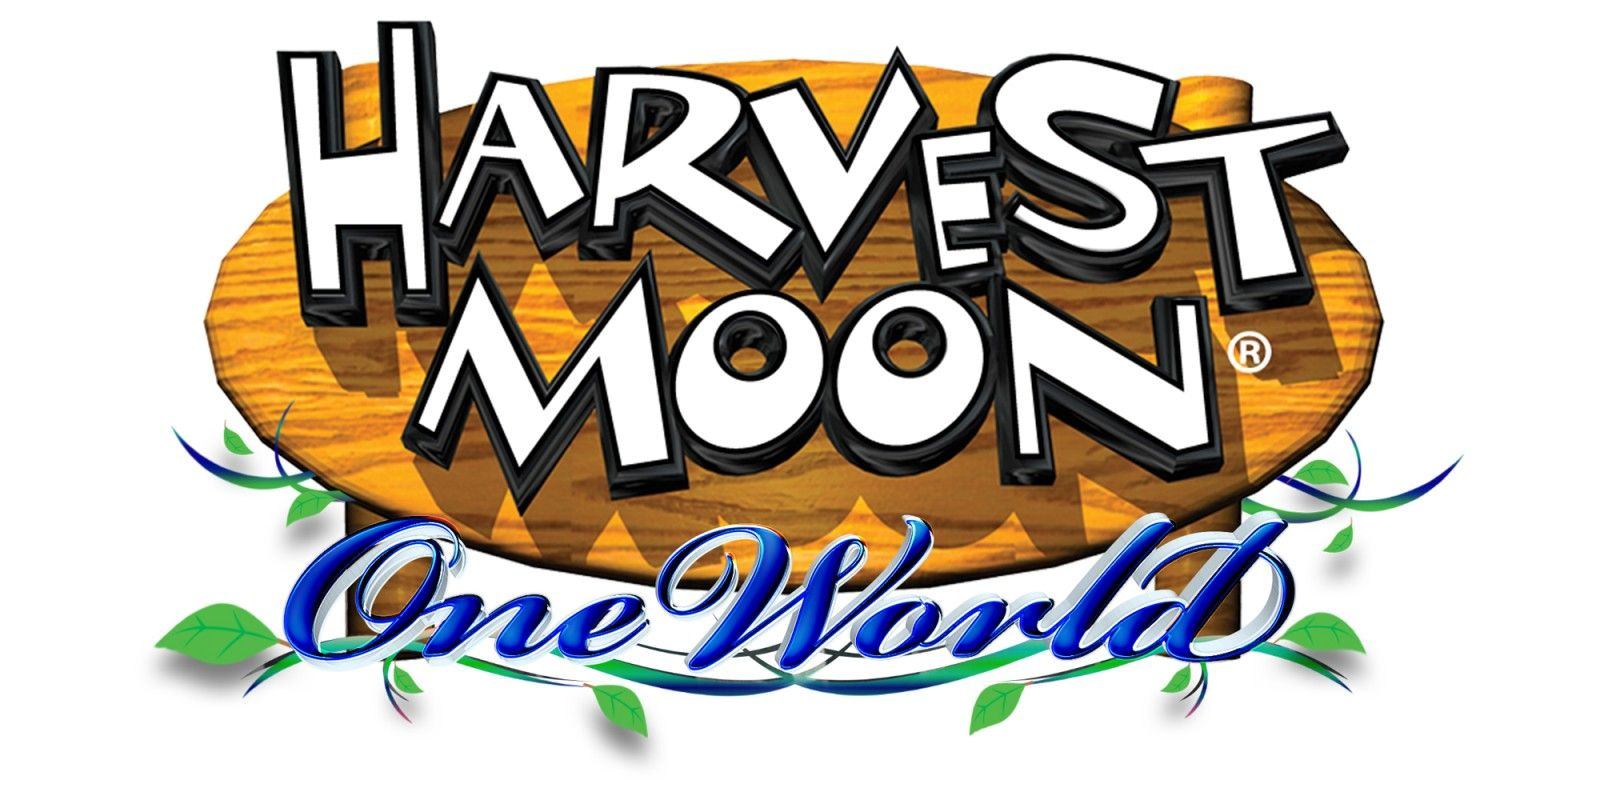 Harvest Moon: One World annunciato per Switch